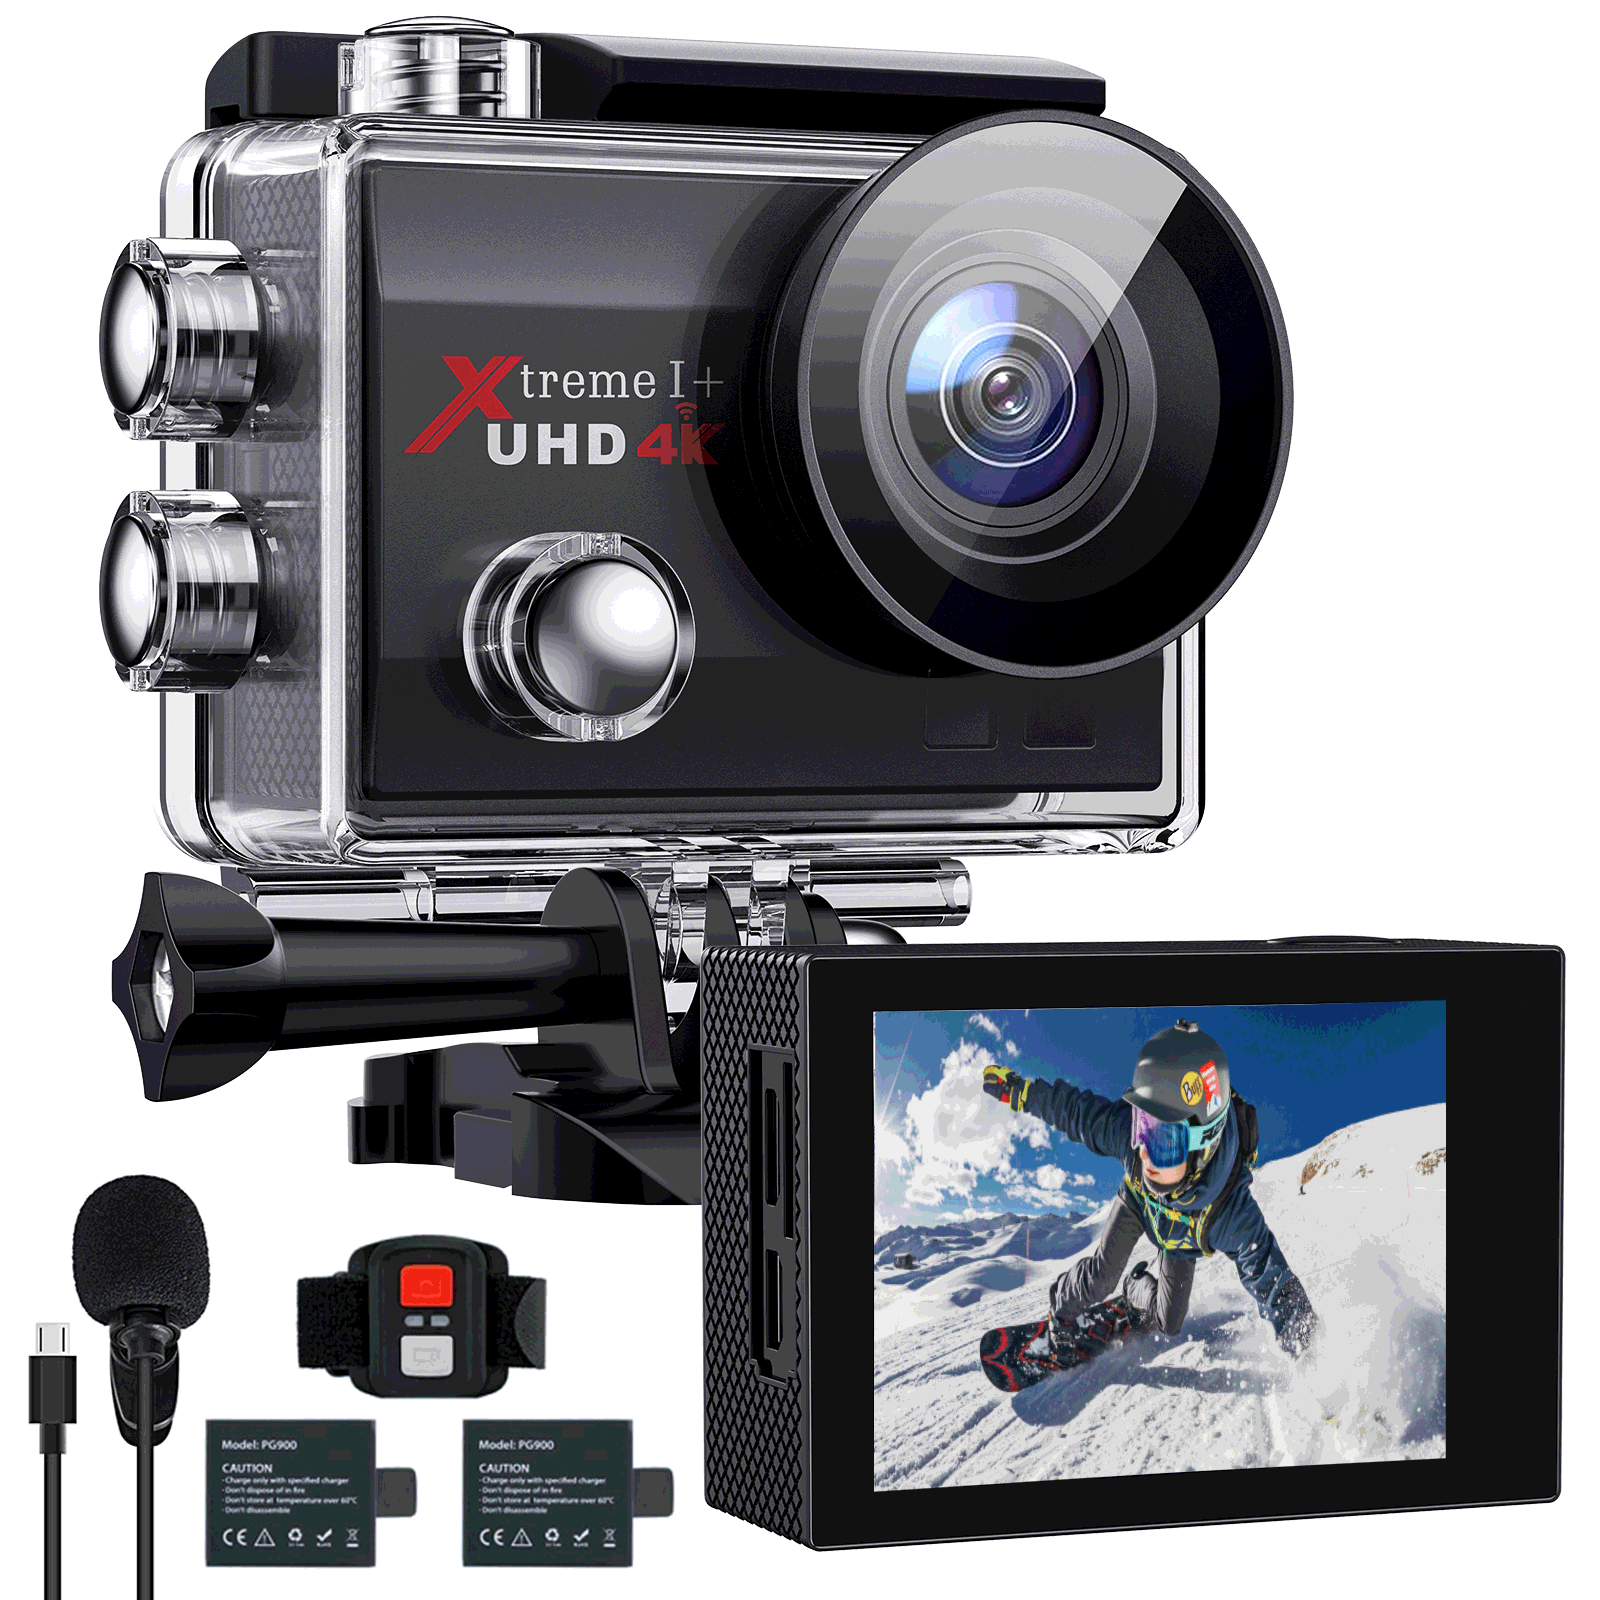 【Upgrade】 Action Camera Native 4K ACTMAN X20C Ultra HD 20MP Waterproof Camera with EIS Support External Mic Touch Screen Remote Control 131ft Underwater Camcorder with 2 Batteries and Accessories 